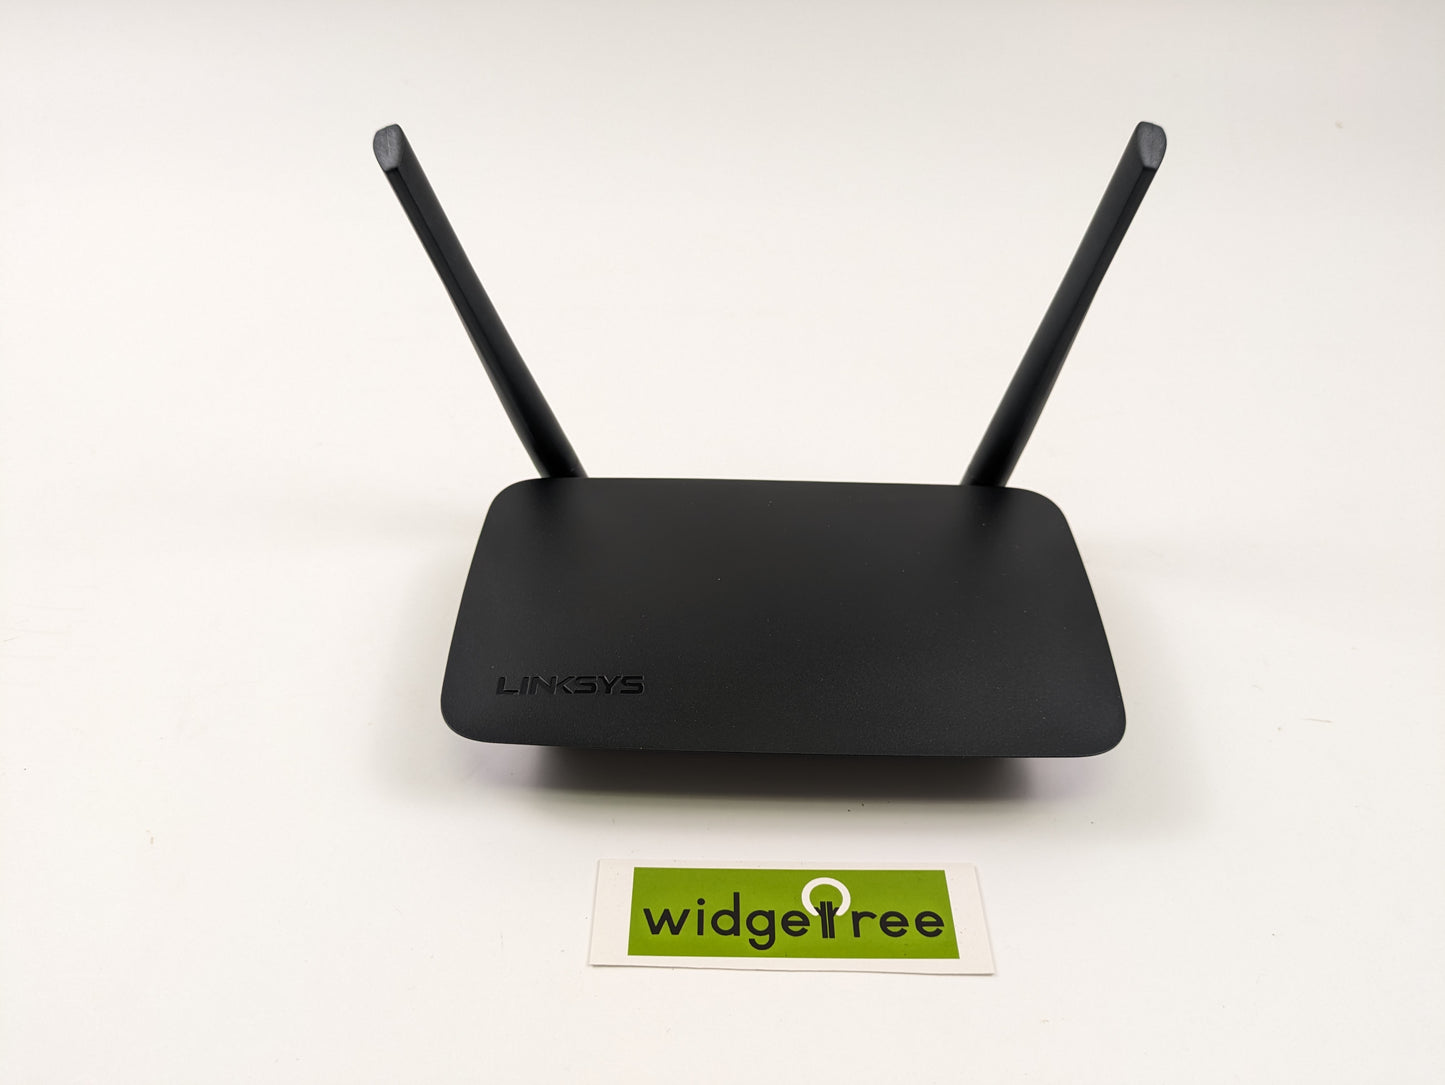 Linksys N600 Dual-Band WiFi Router - E2500-4B Used